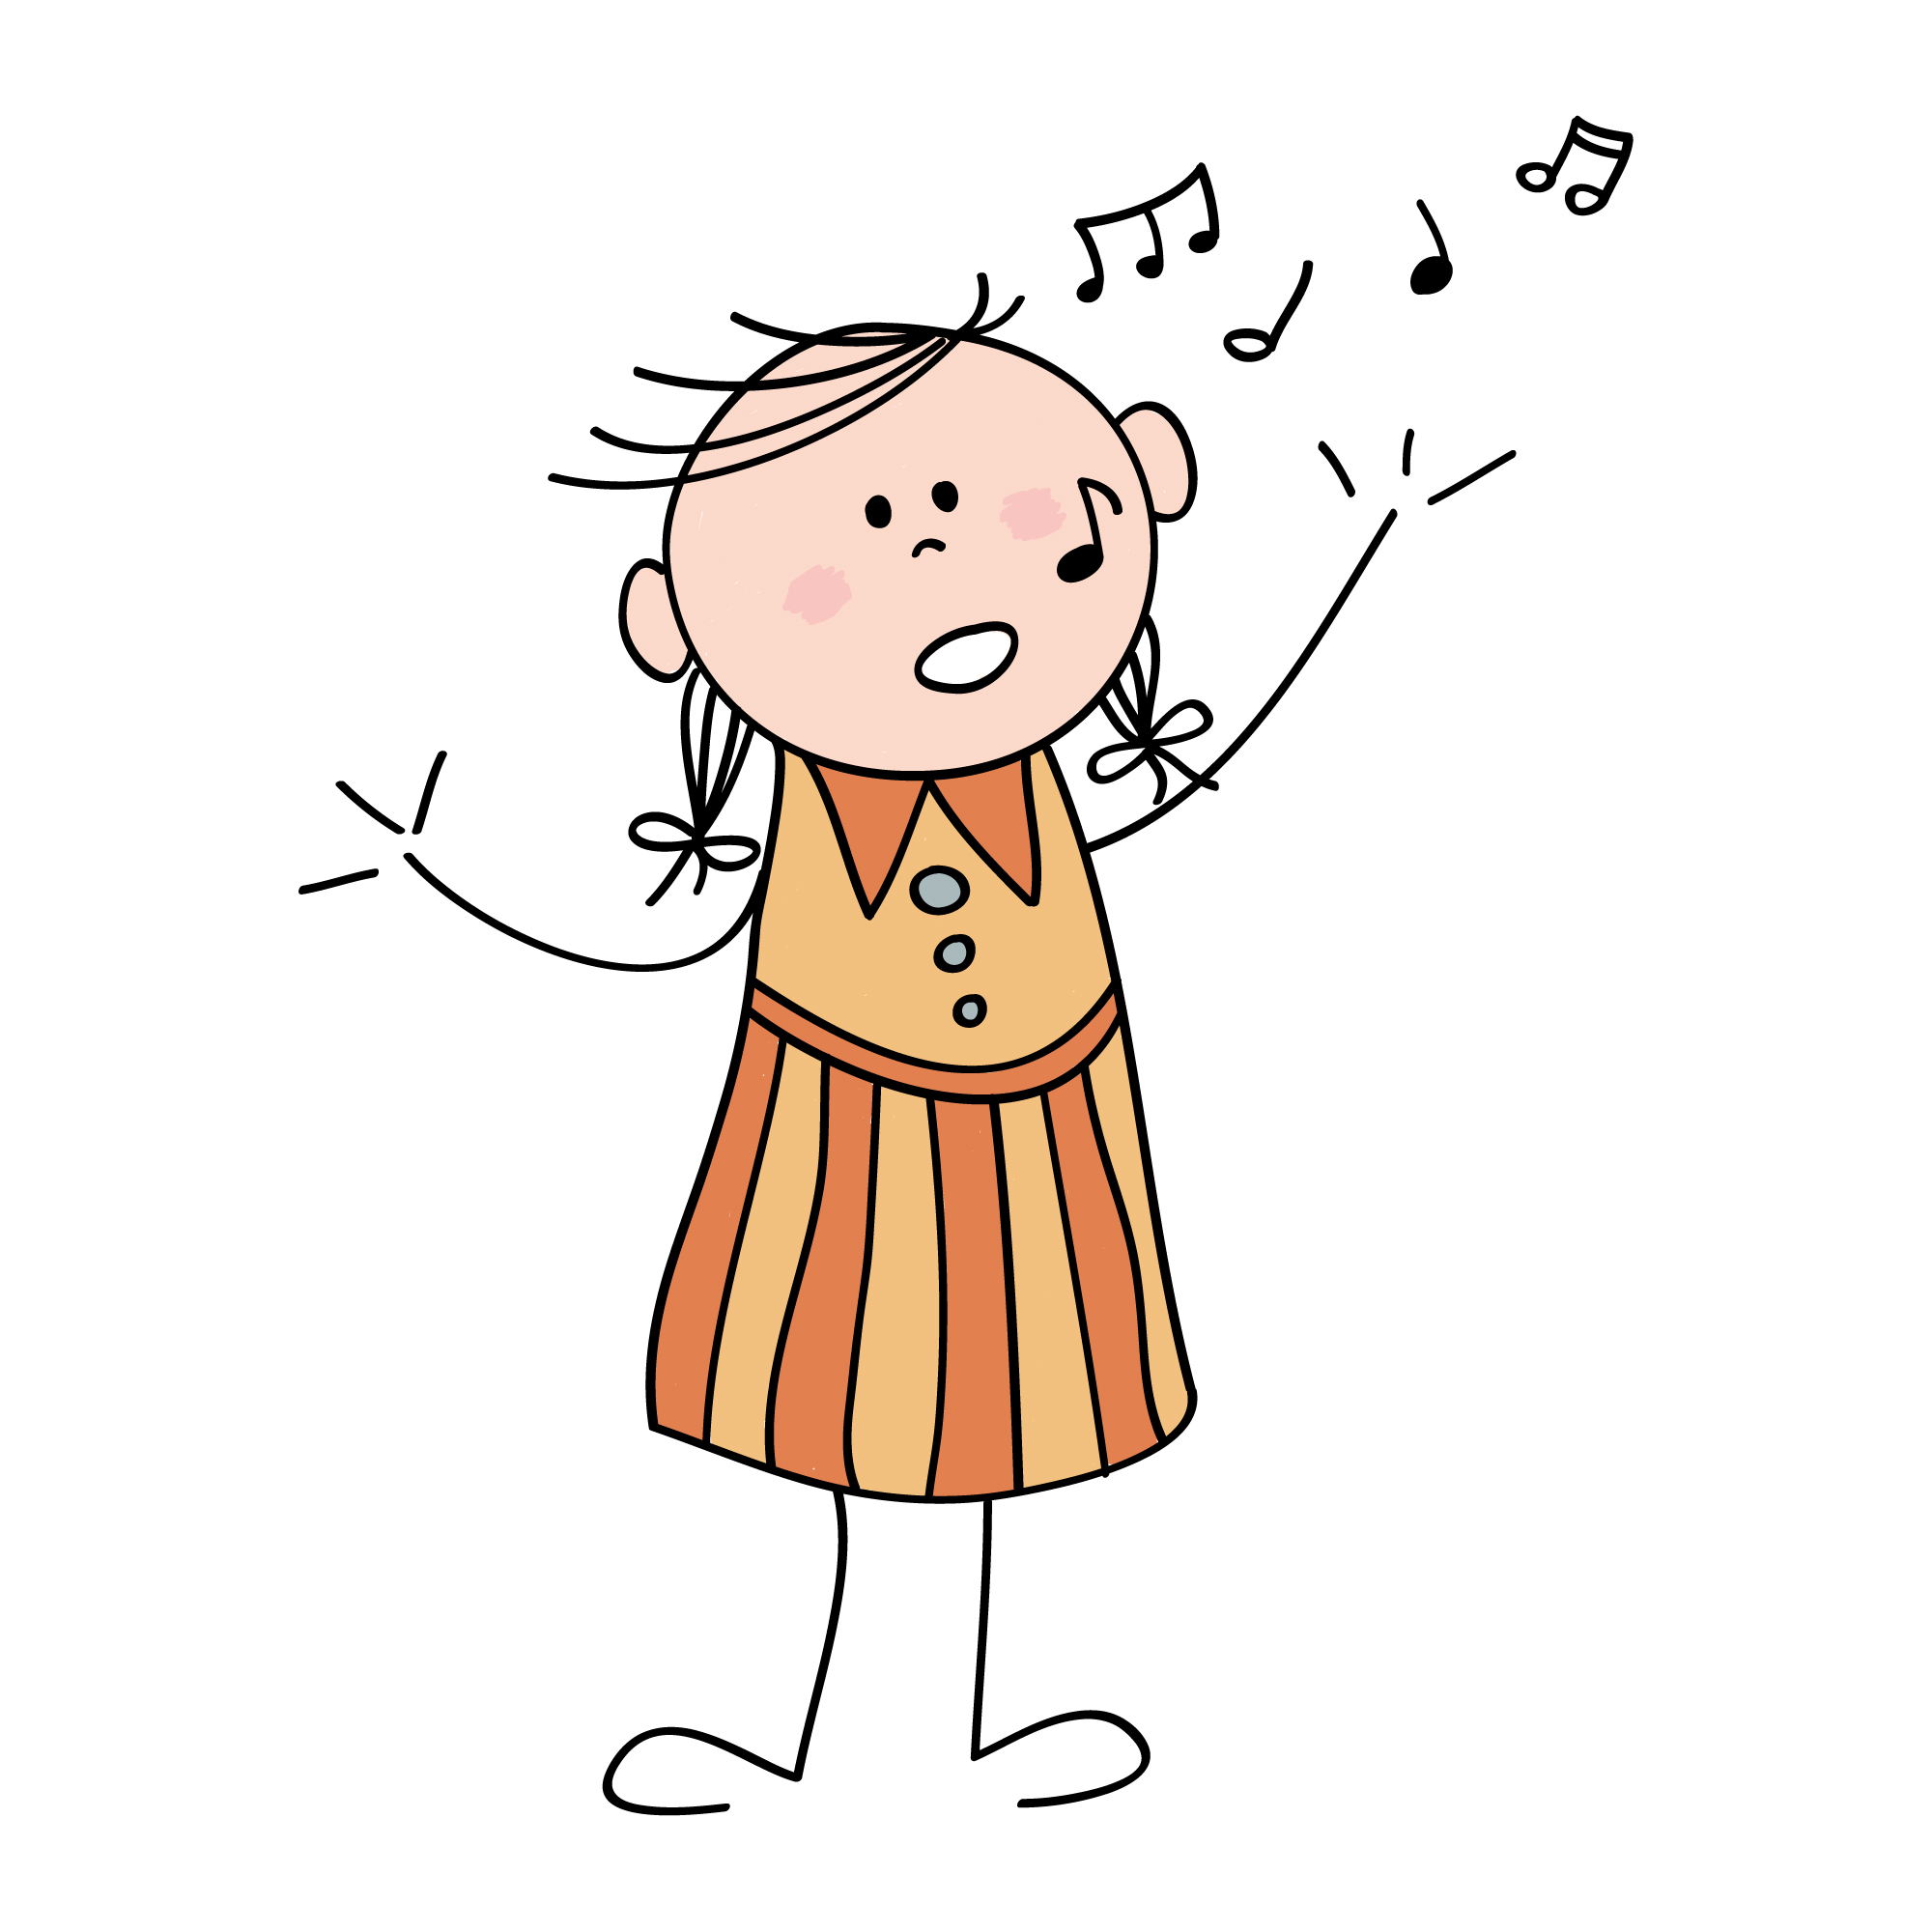 clipart of a girl singing - photo #33